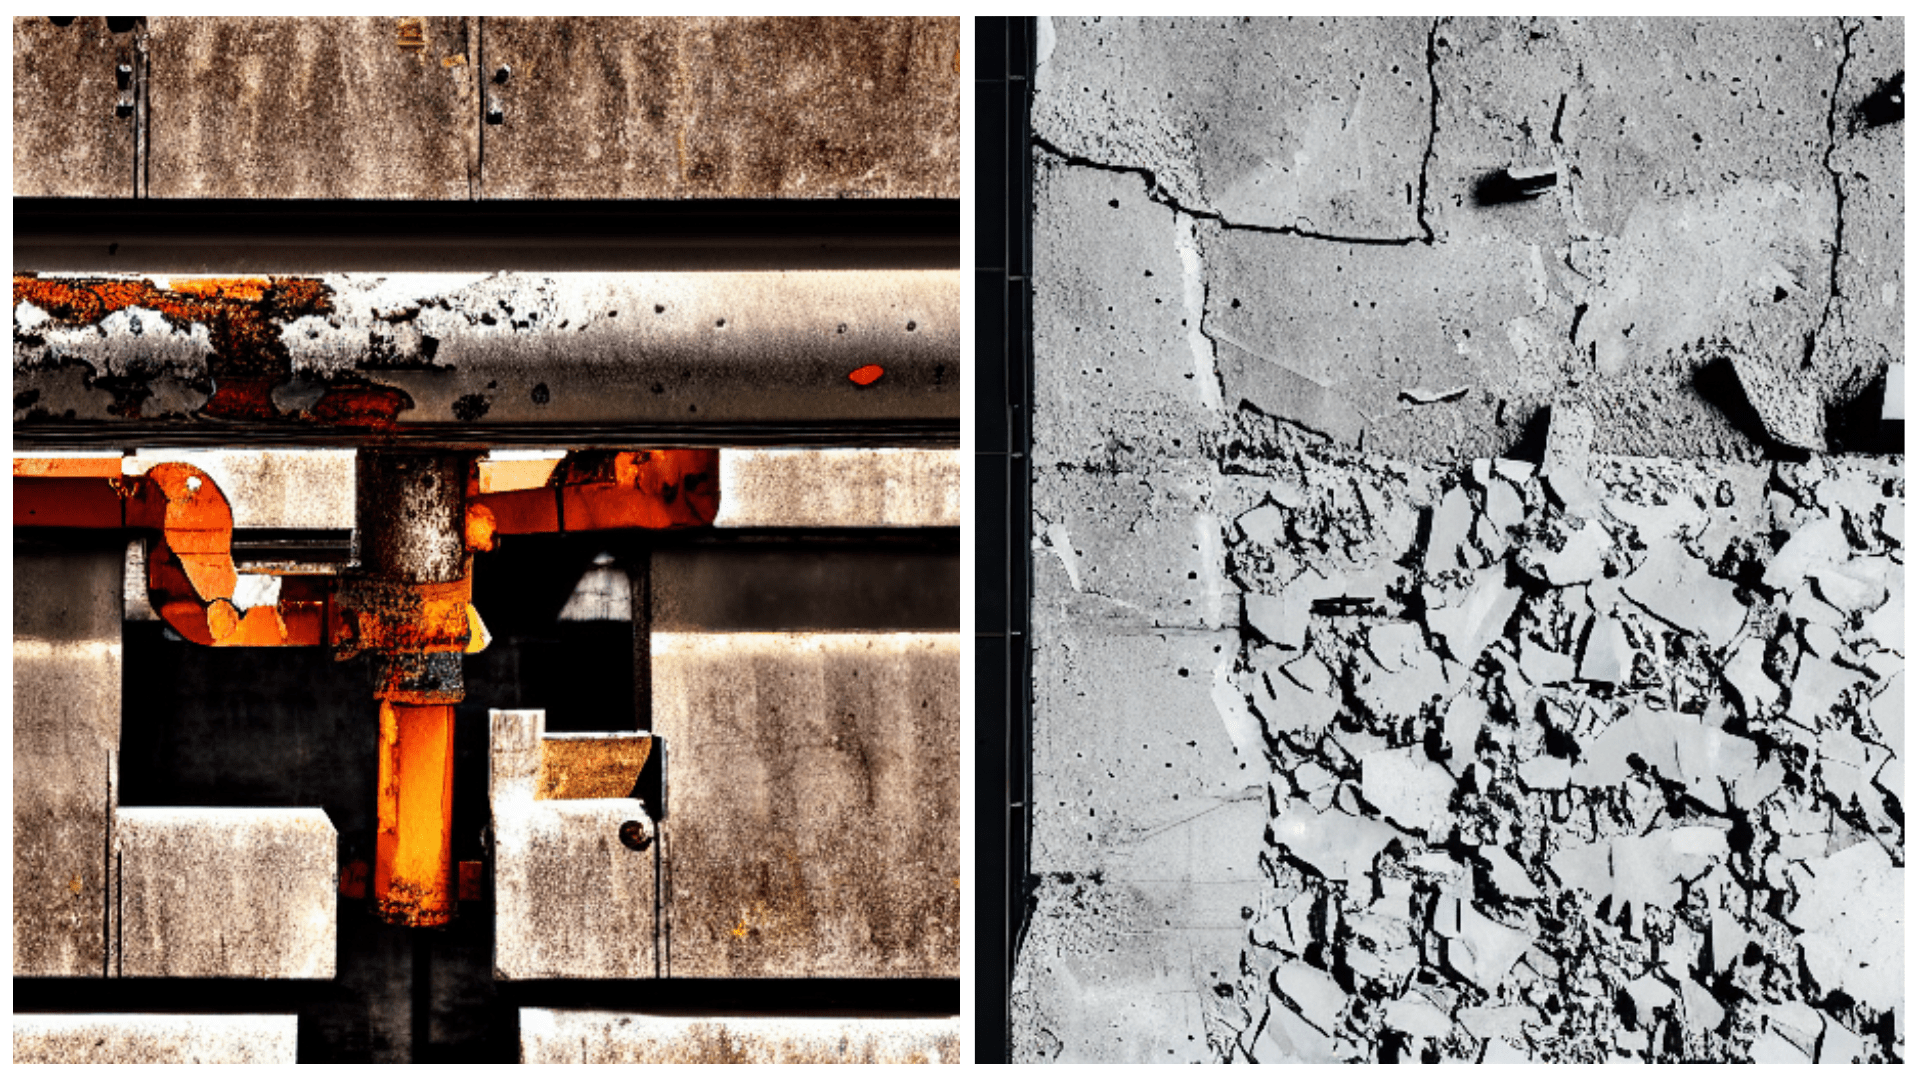 steel and concrete materials rusting and crumbling in structure building materials, 